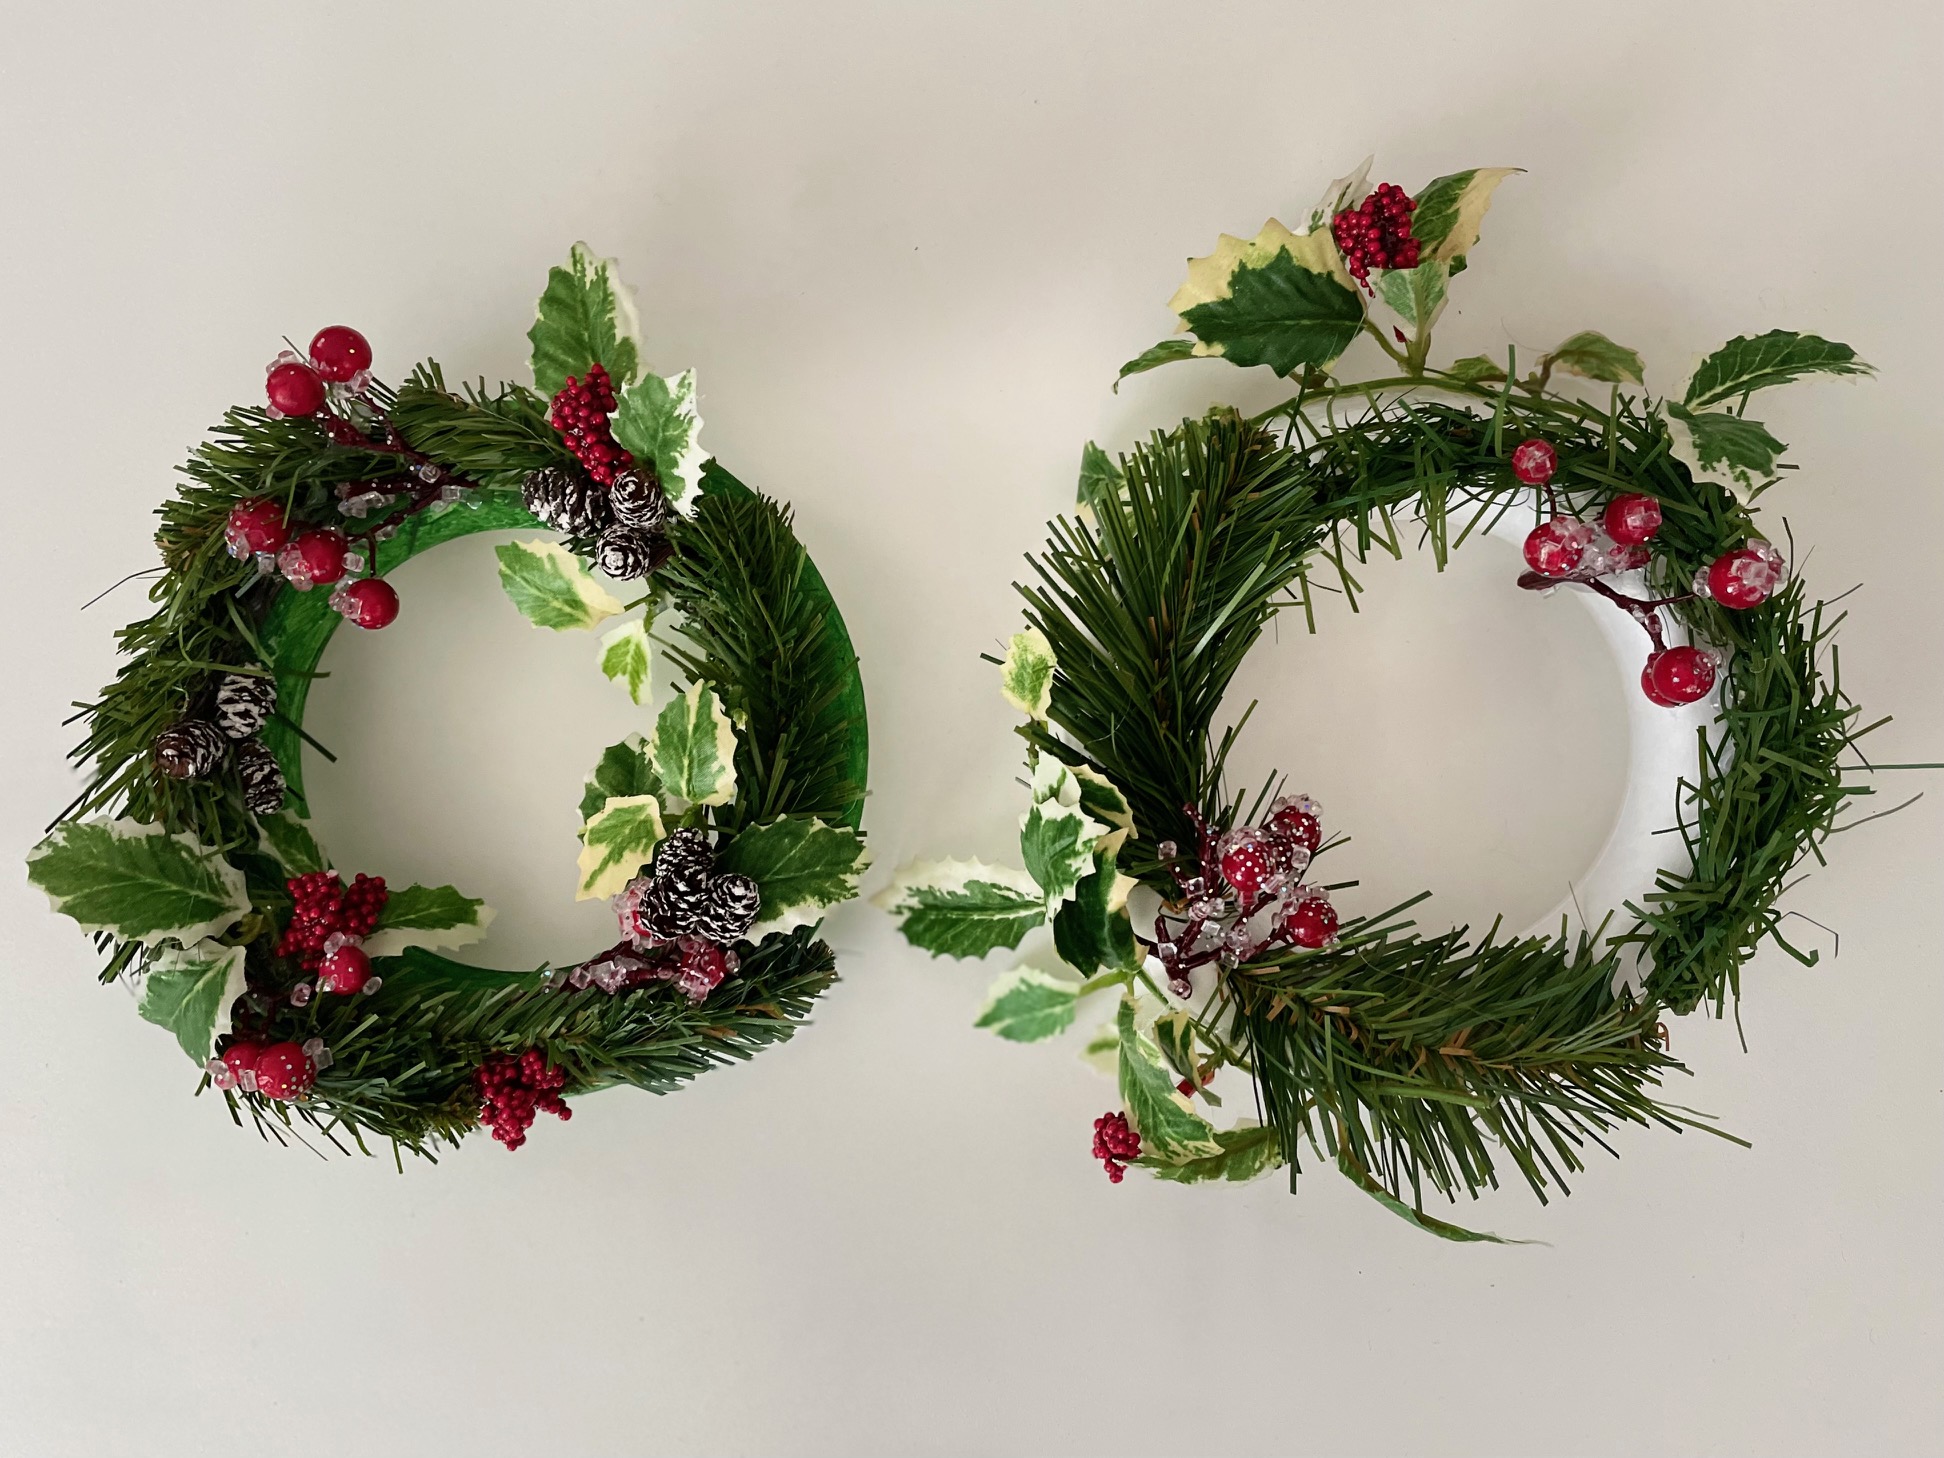 Wreaths made by two children, one ten years old and the other, seven.